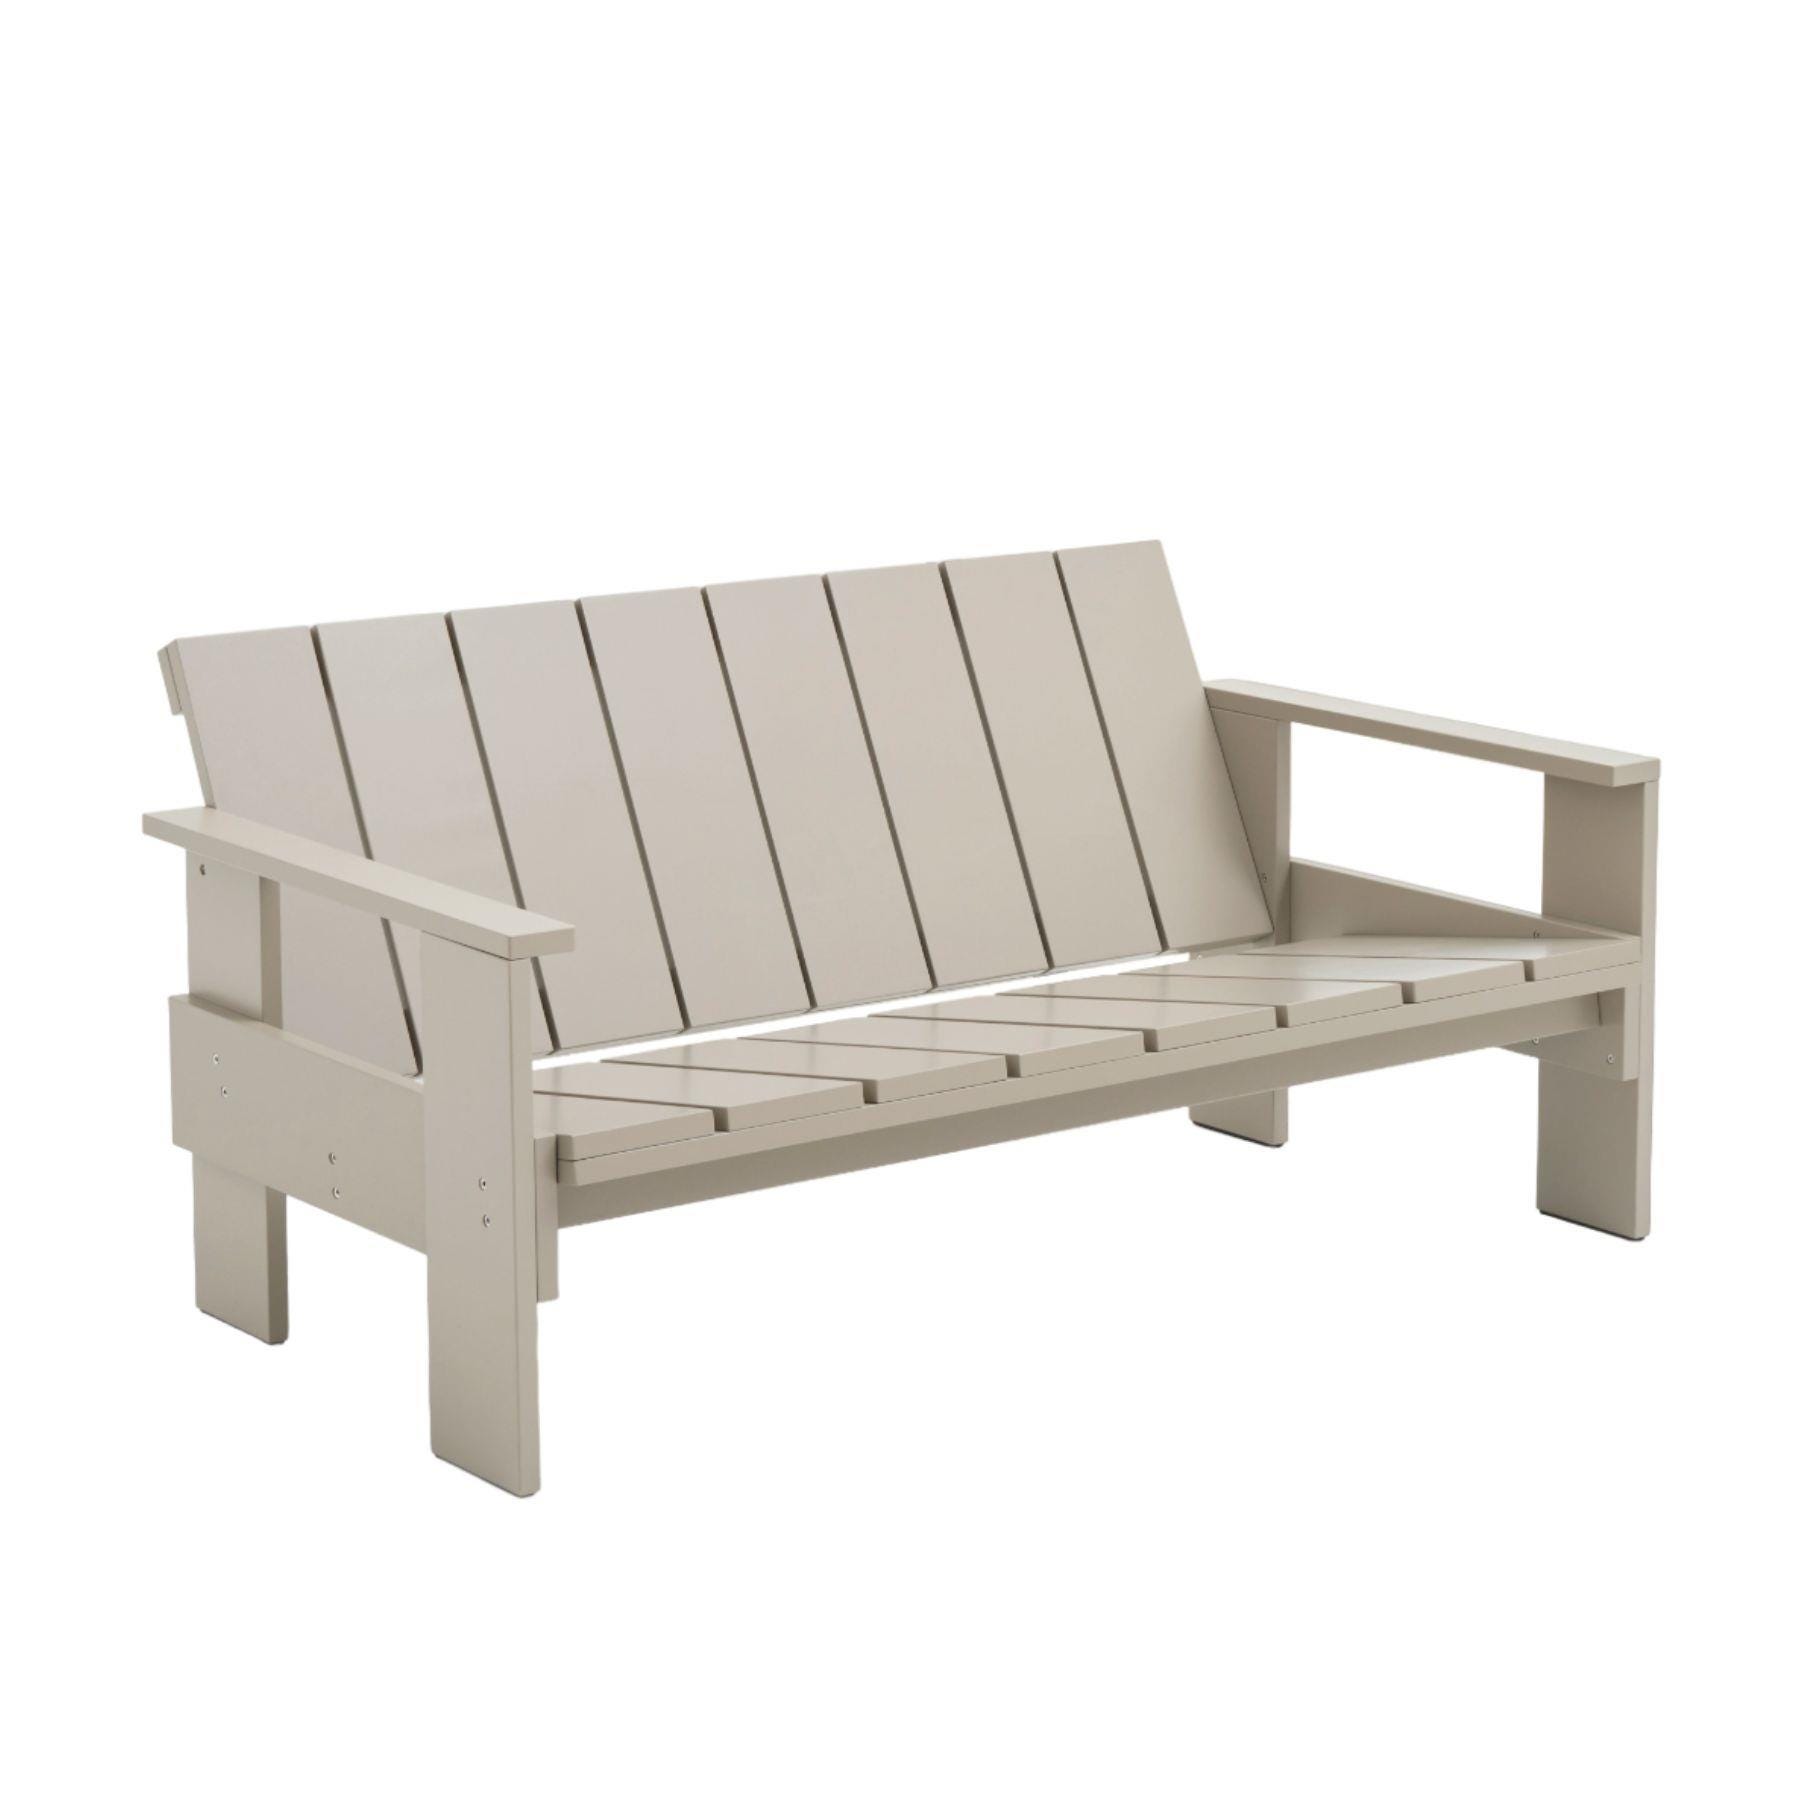 Hay Crate Lounge Sofa Fog Water Grey Designer Furniture From Holloways Of Ludlow